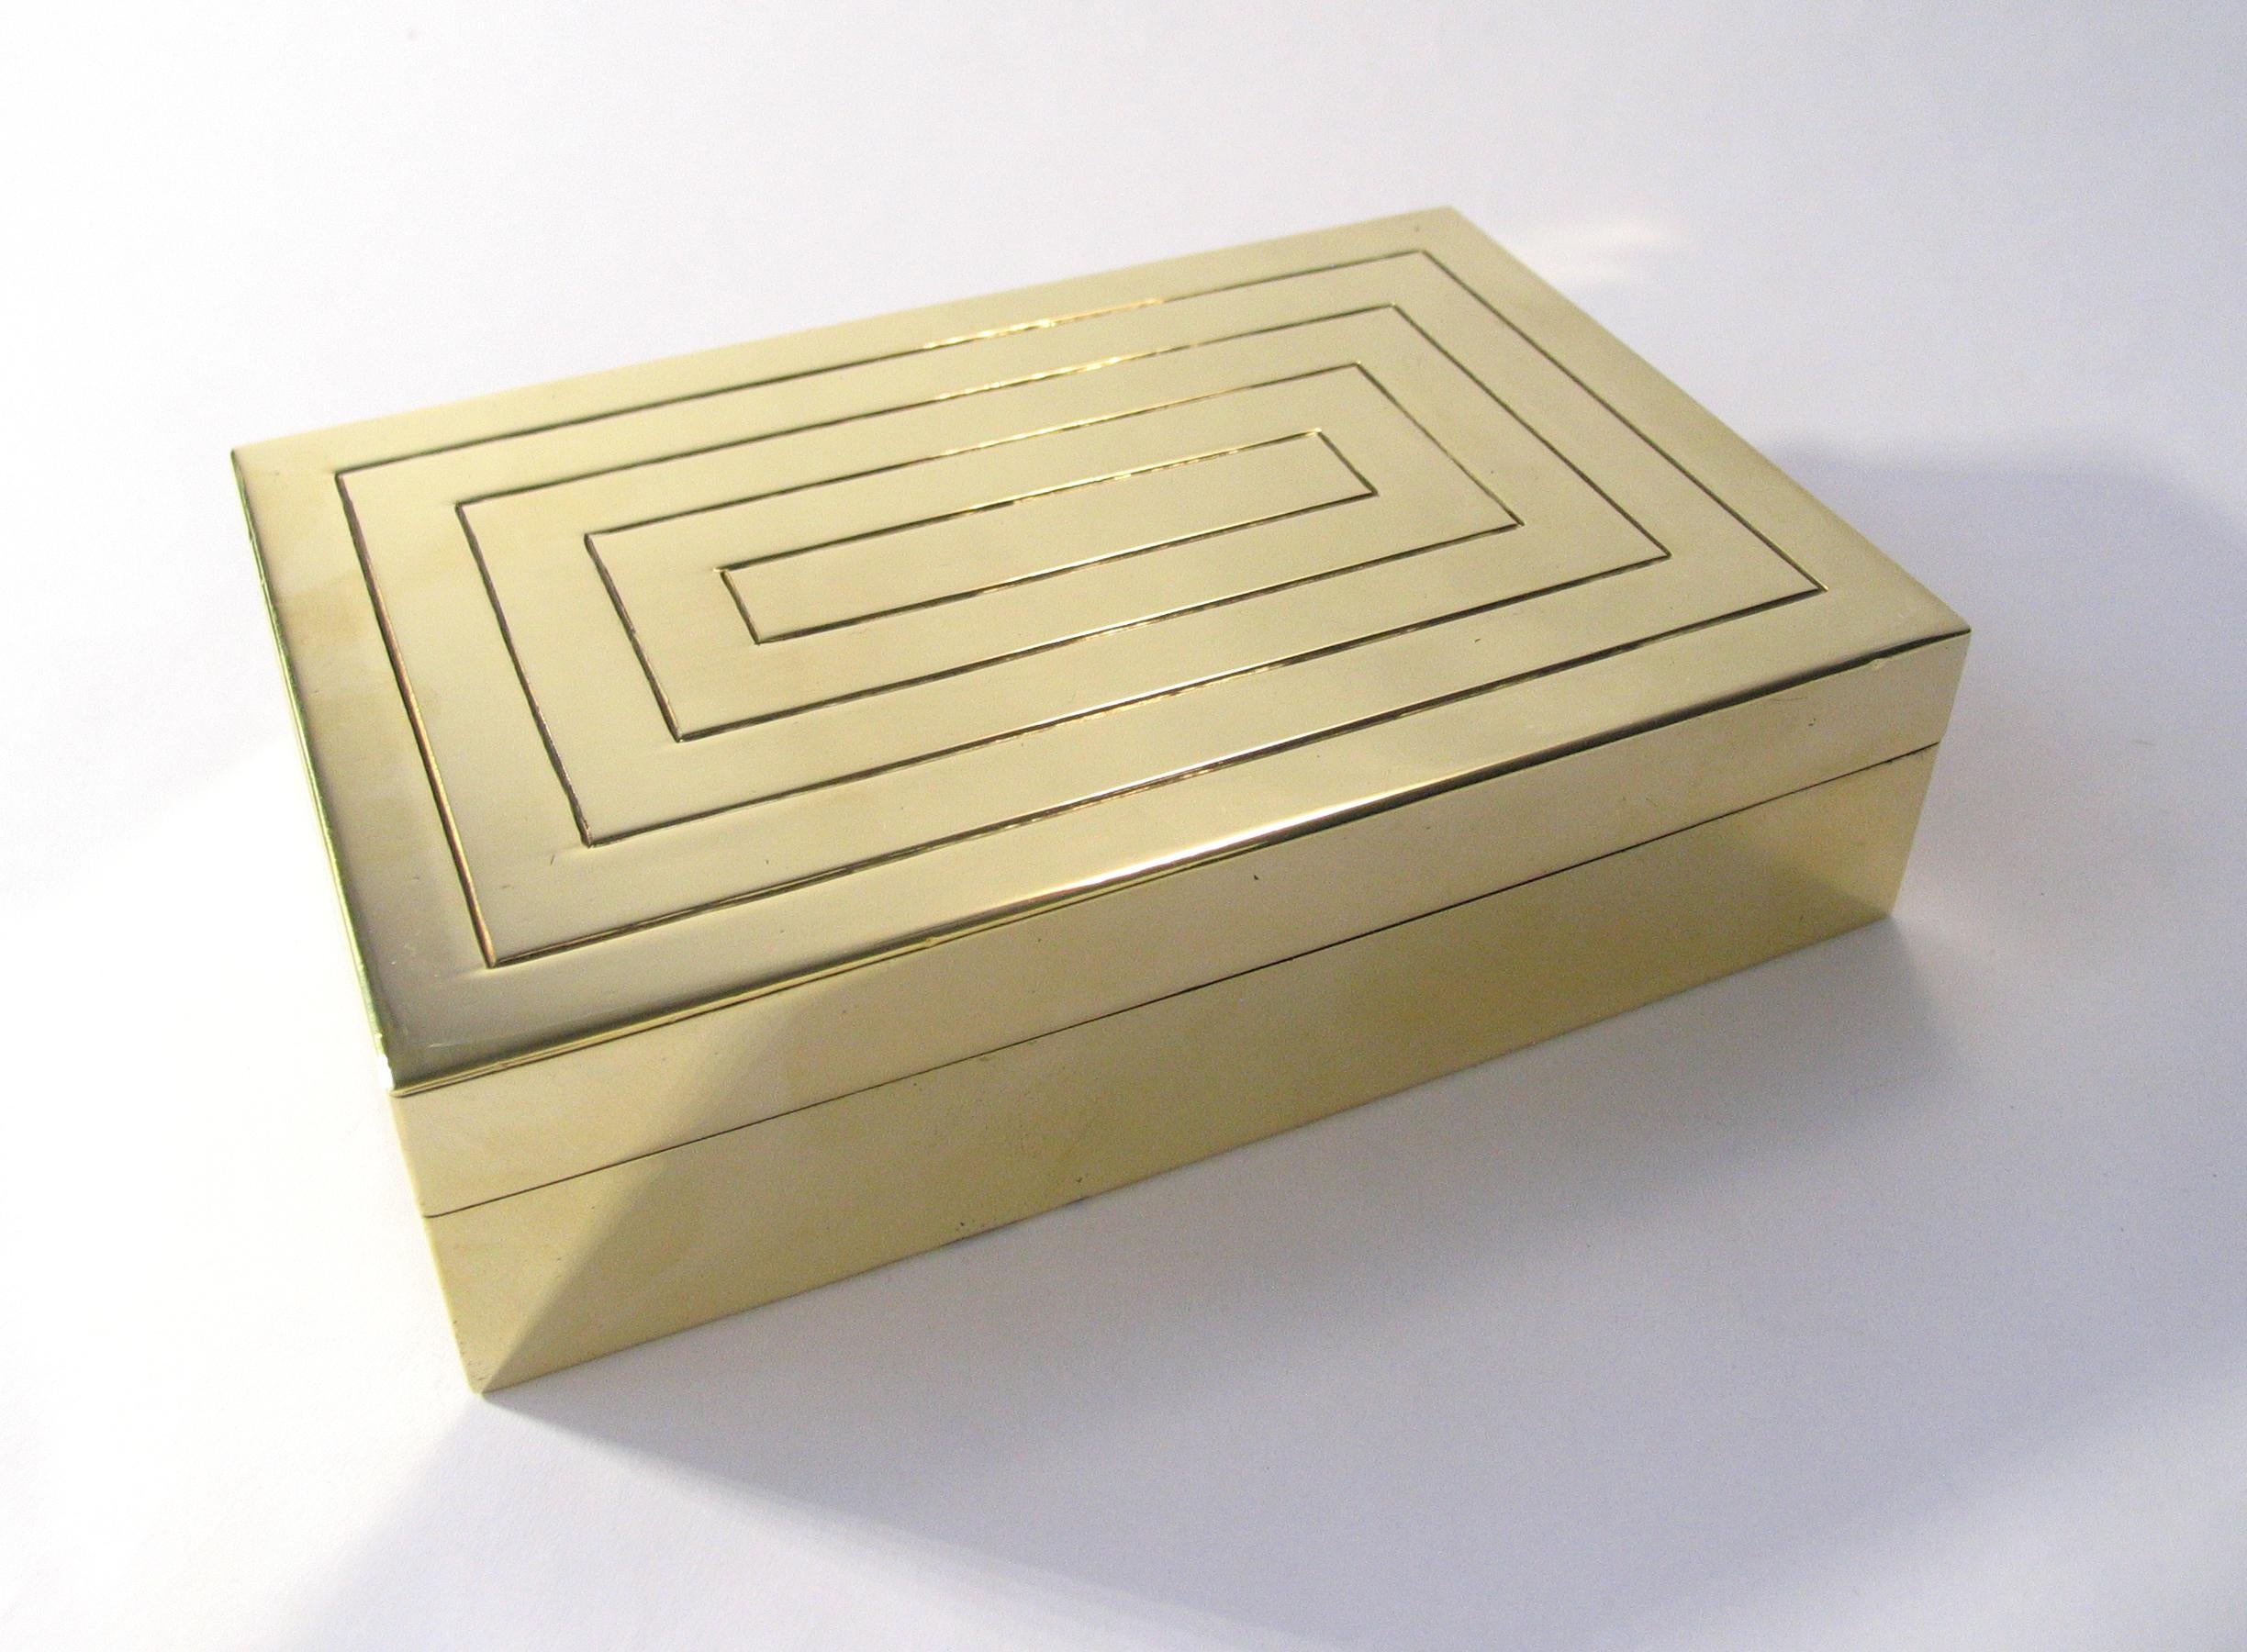 Gorgeous Art Deco engraved and polished brass jewelry box with wood lining.
Handcrafted and signed by Austrian studio metalsmith J. Braun, with hammer logo.
Stamped Rena, retailed at the original Rena Rosenthal store in New York City, circa